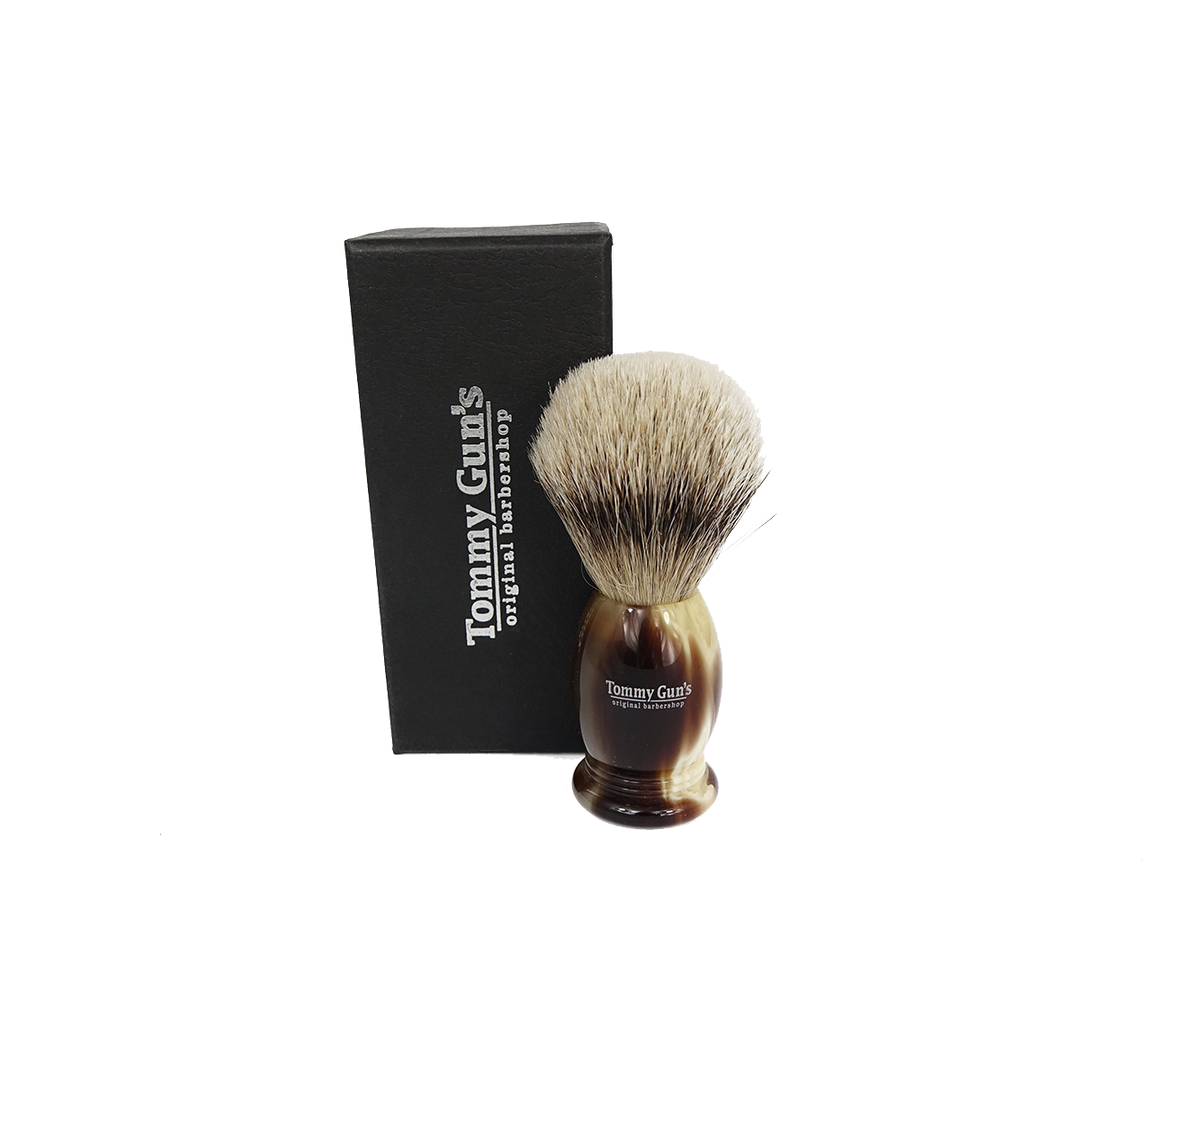 Tommy Gun&#39;s Shave Tommy Guns Shave Brush Faux Horn Handle 20mm Silver Tip Badger S121-FH04